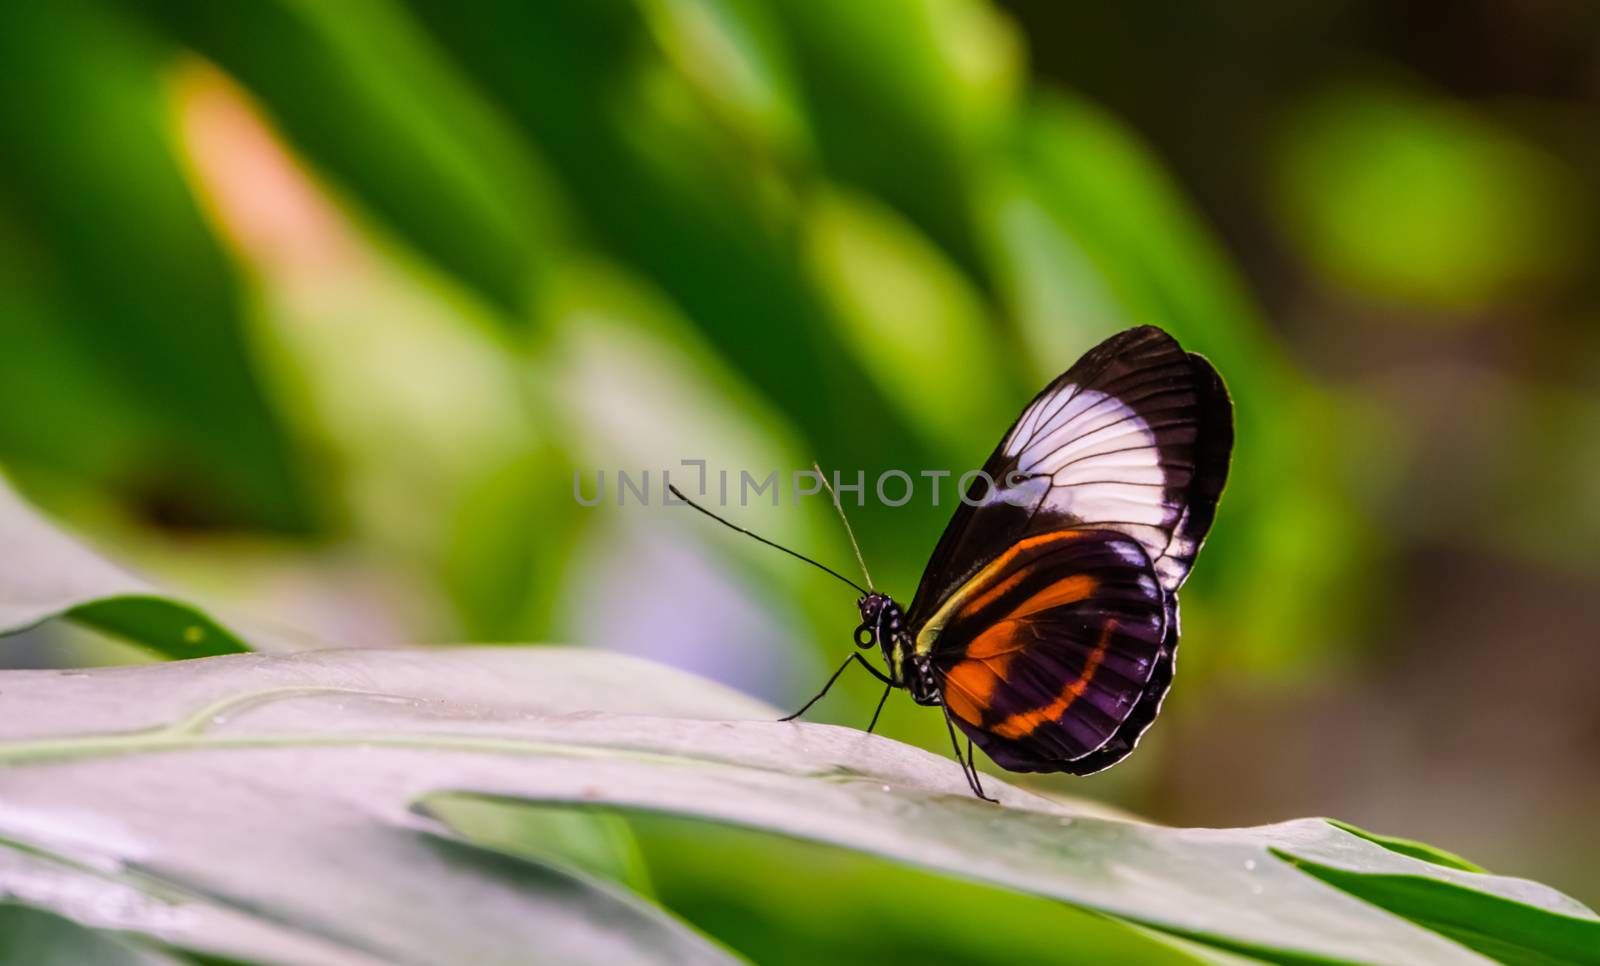 closeup of a postman butterfly on a leaf, nature background, tropical insect specie from America by charlottebleijenberg